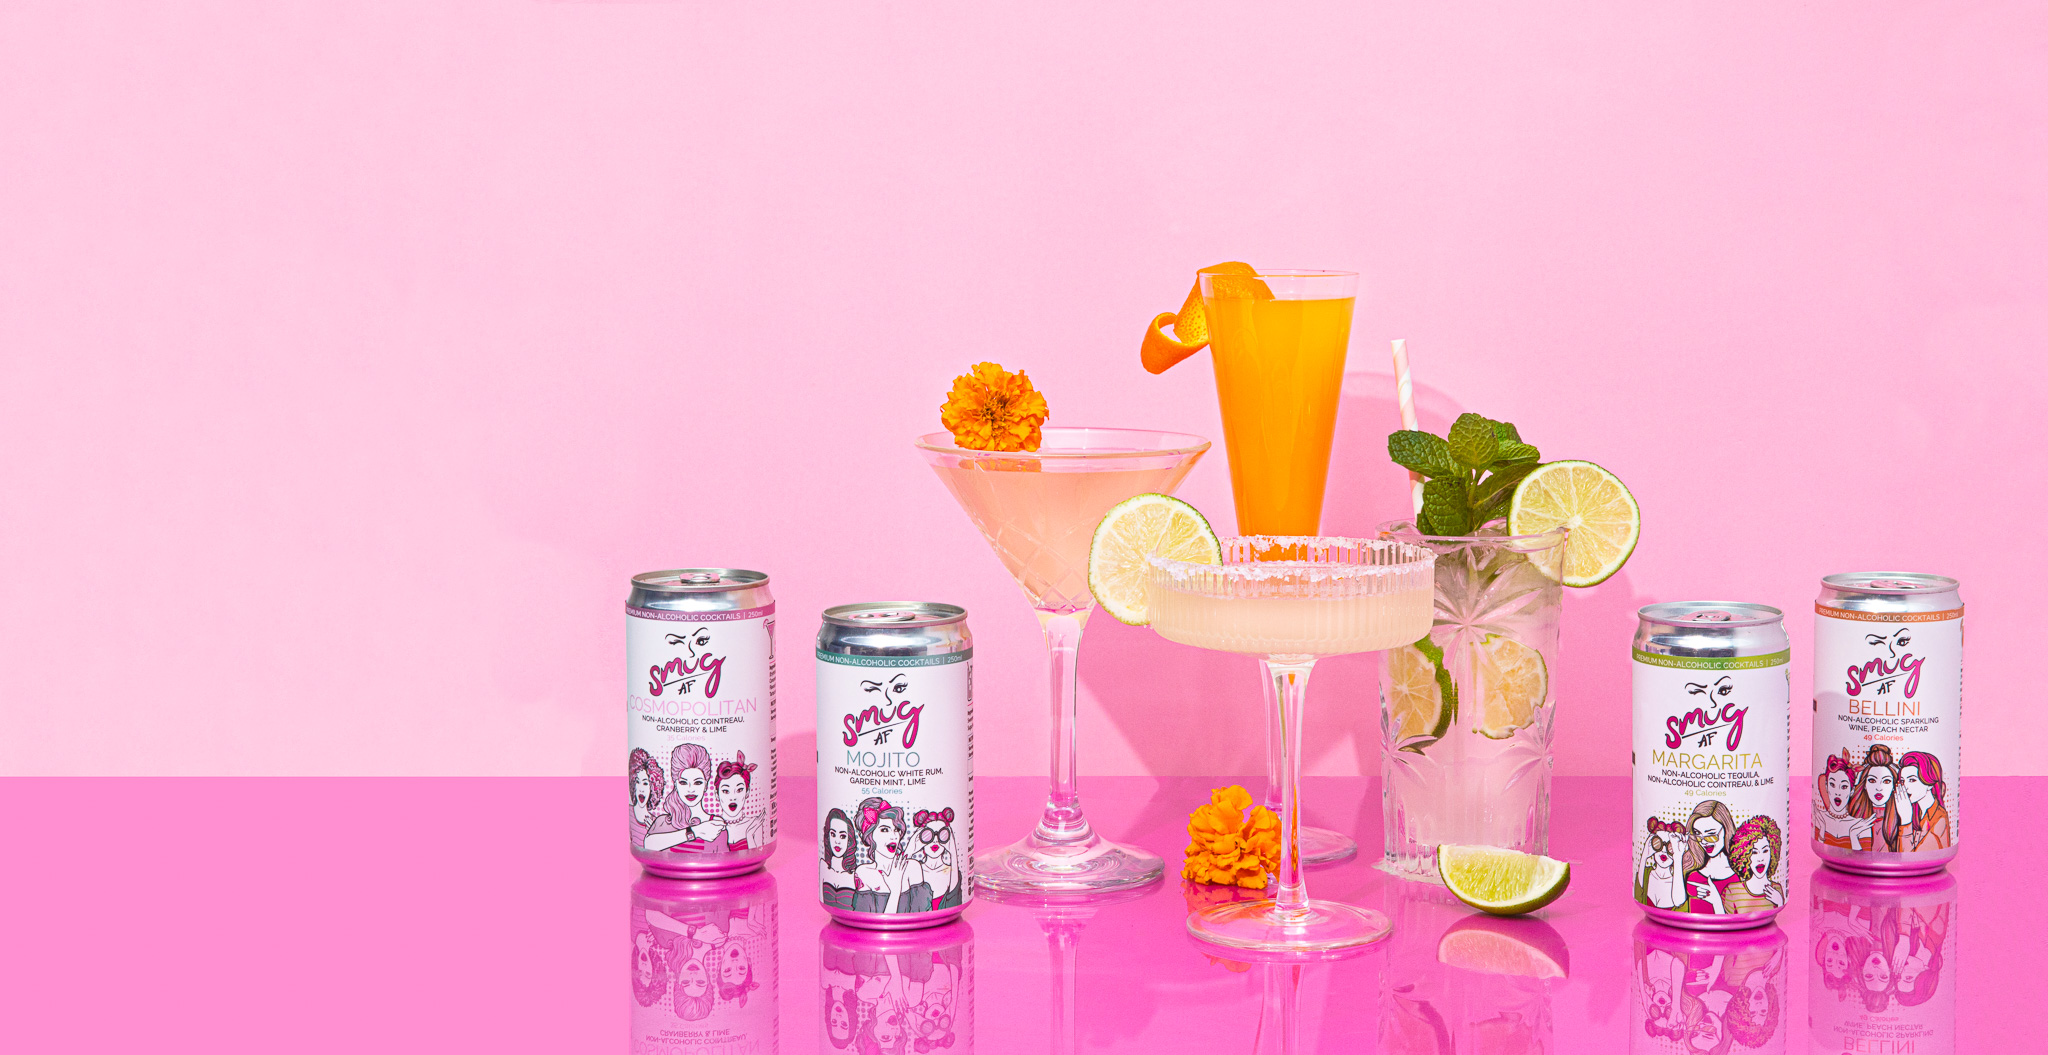 Smug AF Cocktails aranged in a nice shot on a pink background. Virgin Margarita, Bellini, Mojito and Cosmo